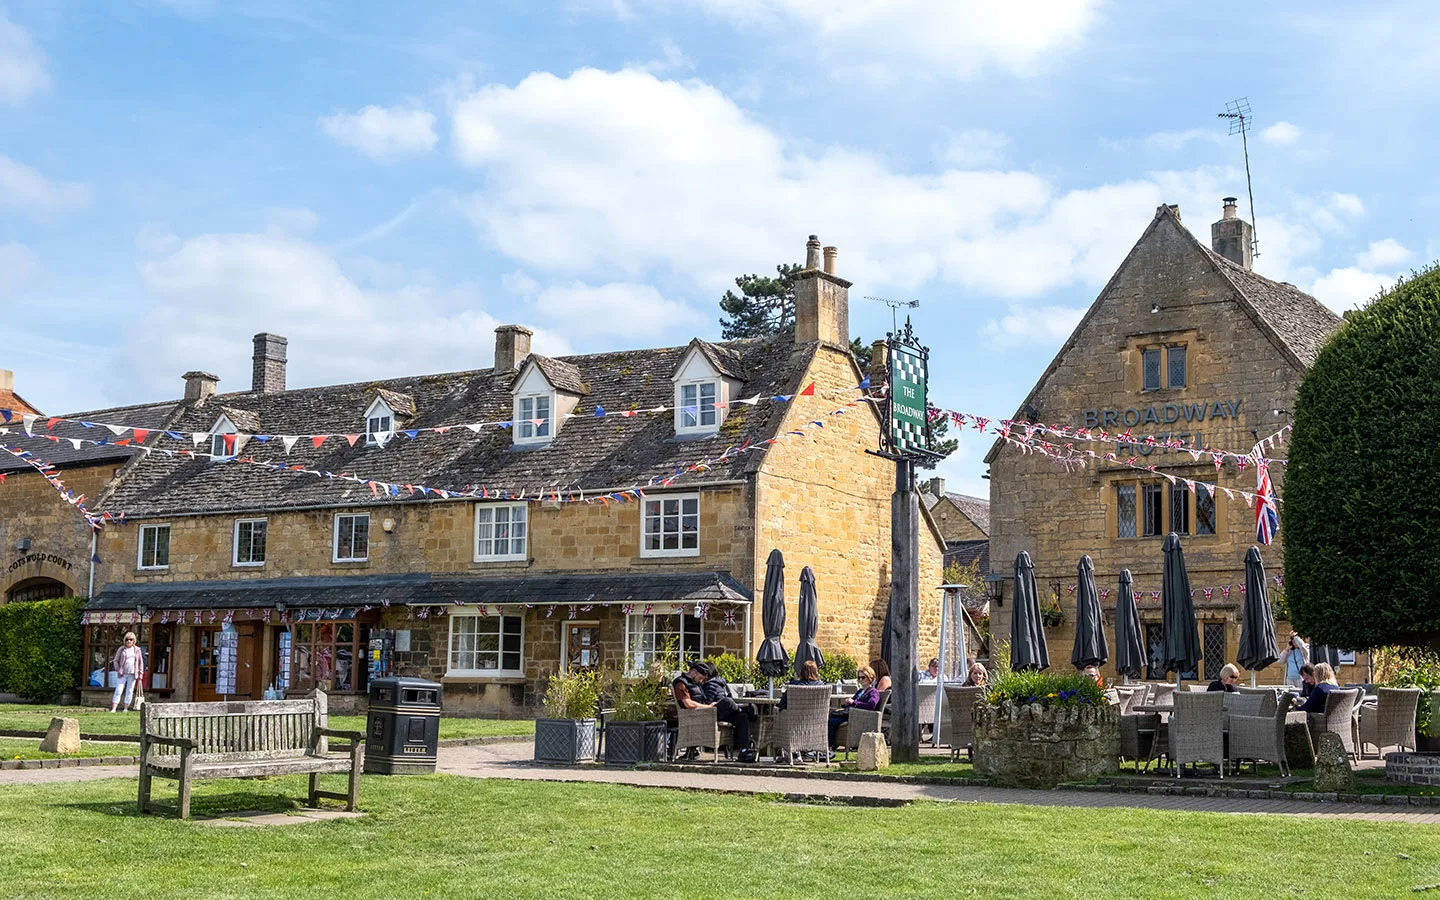 The village green in Broadway, Cotswolds